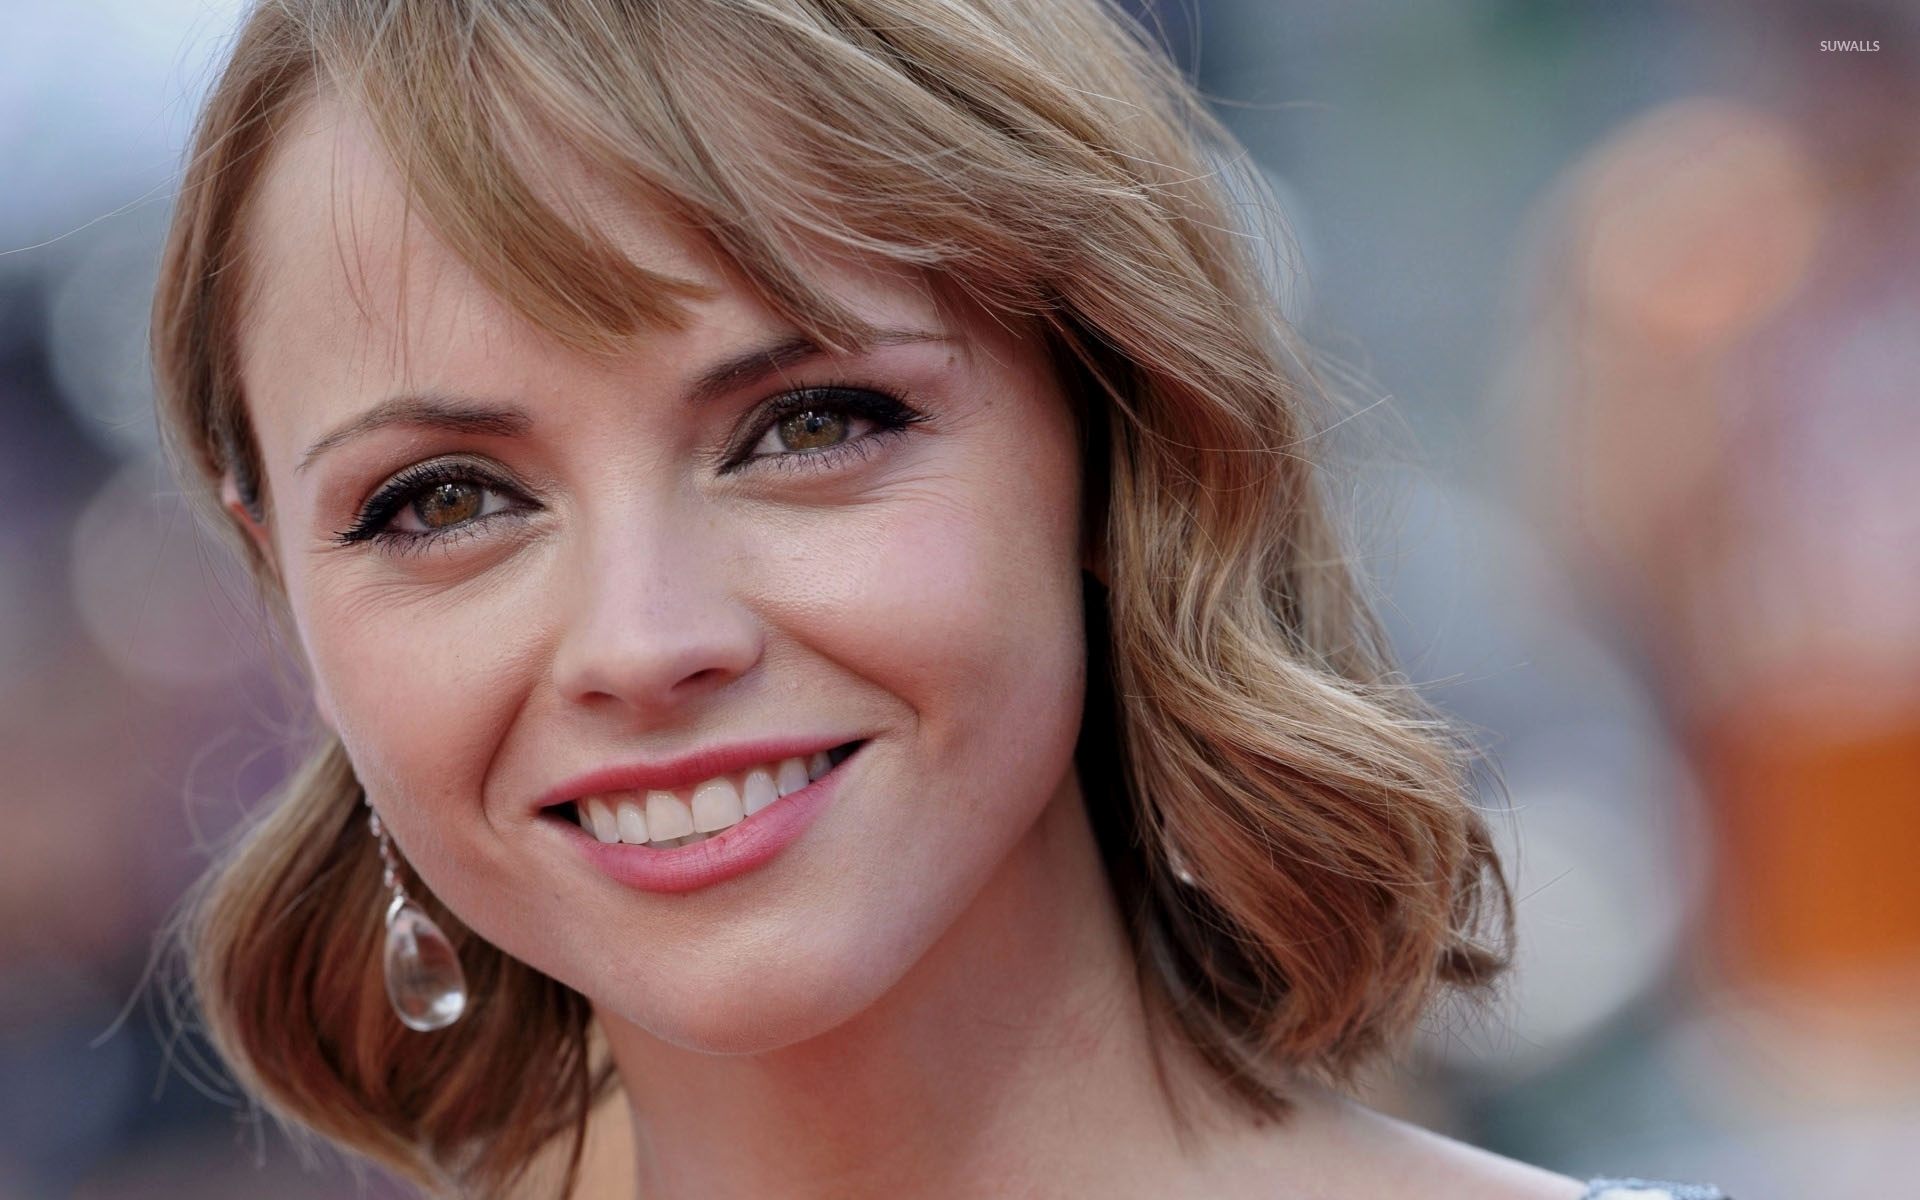 2. How to Get Christina Ricci's Blonde Hair - wide 3